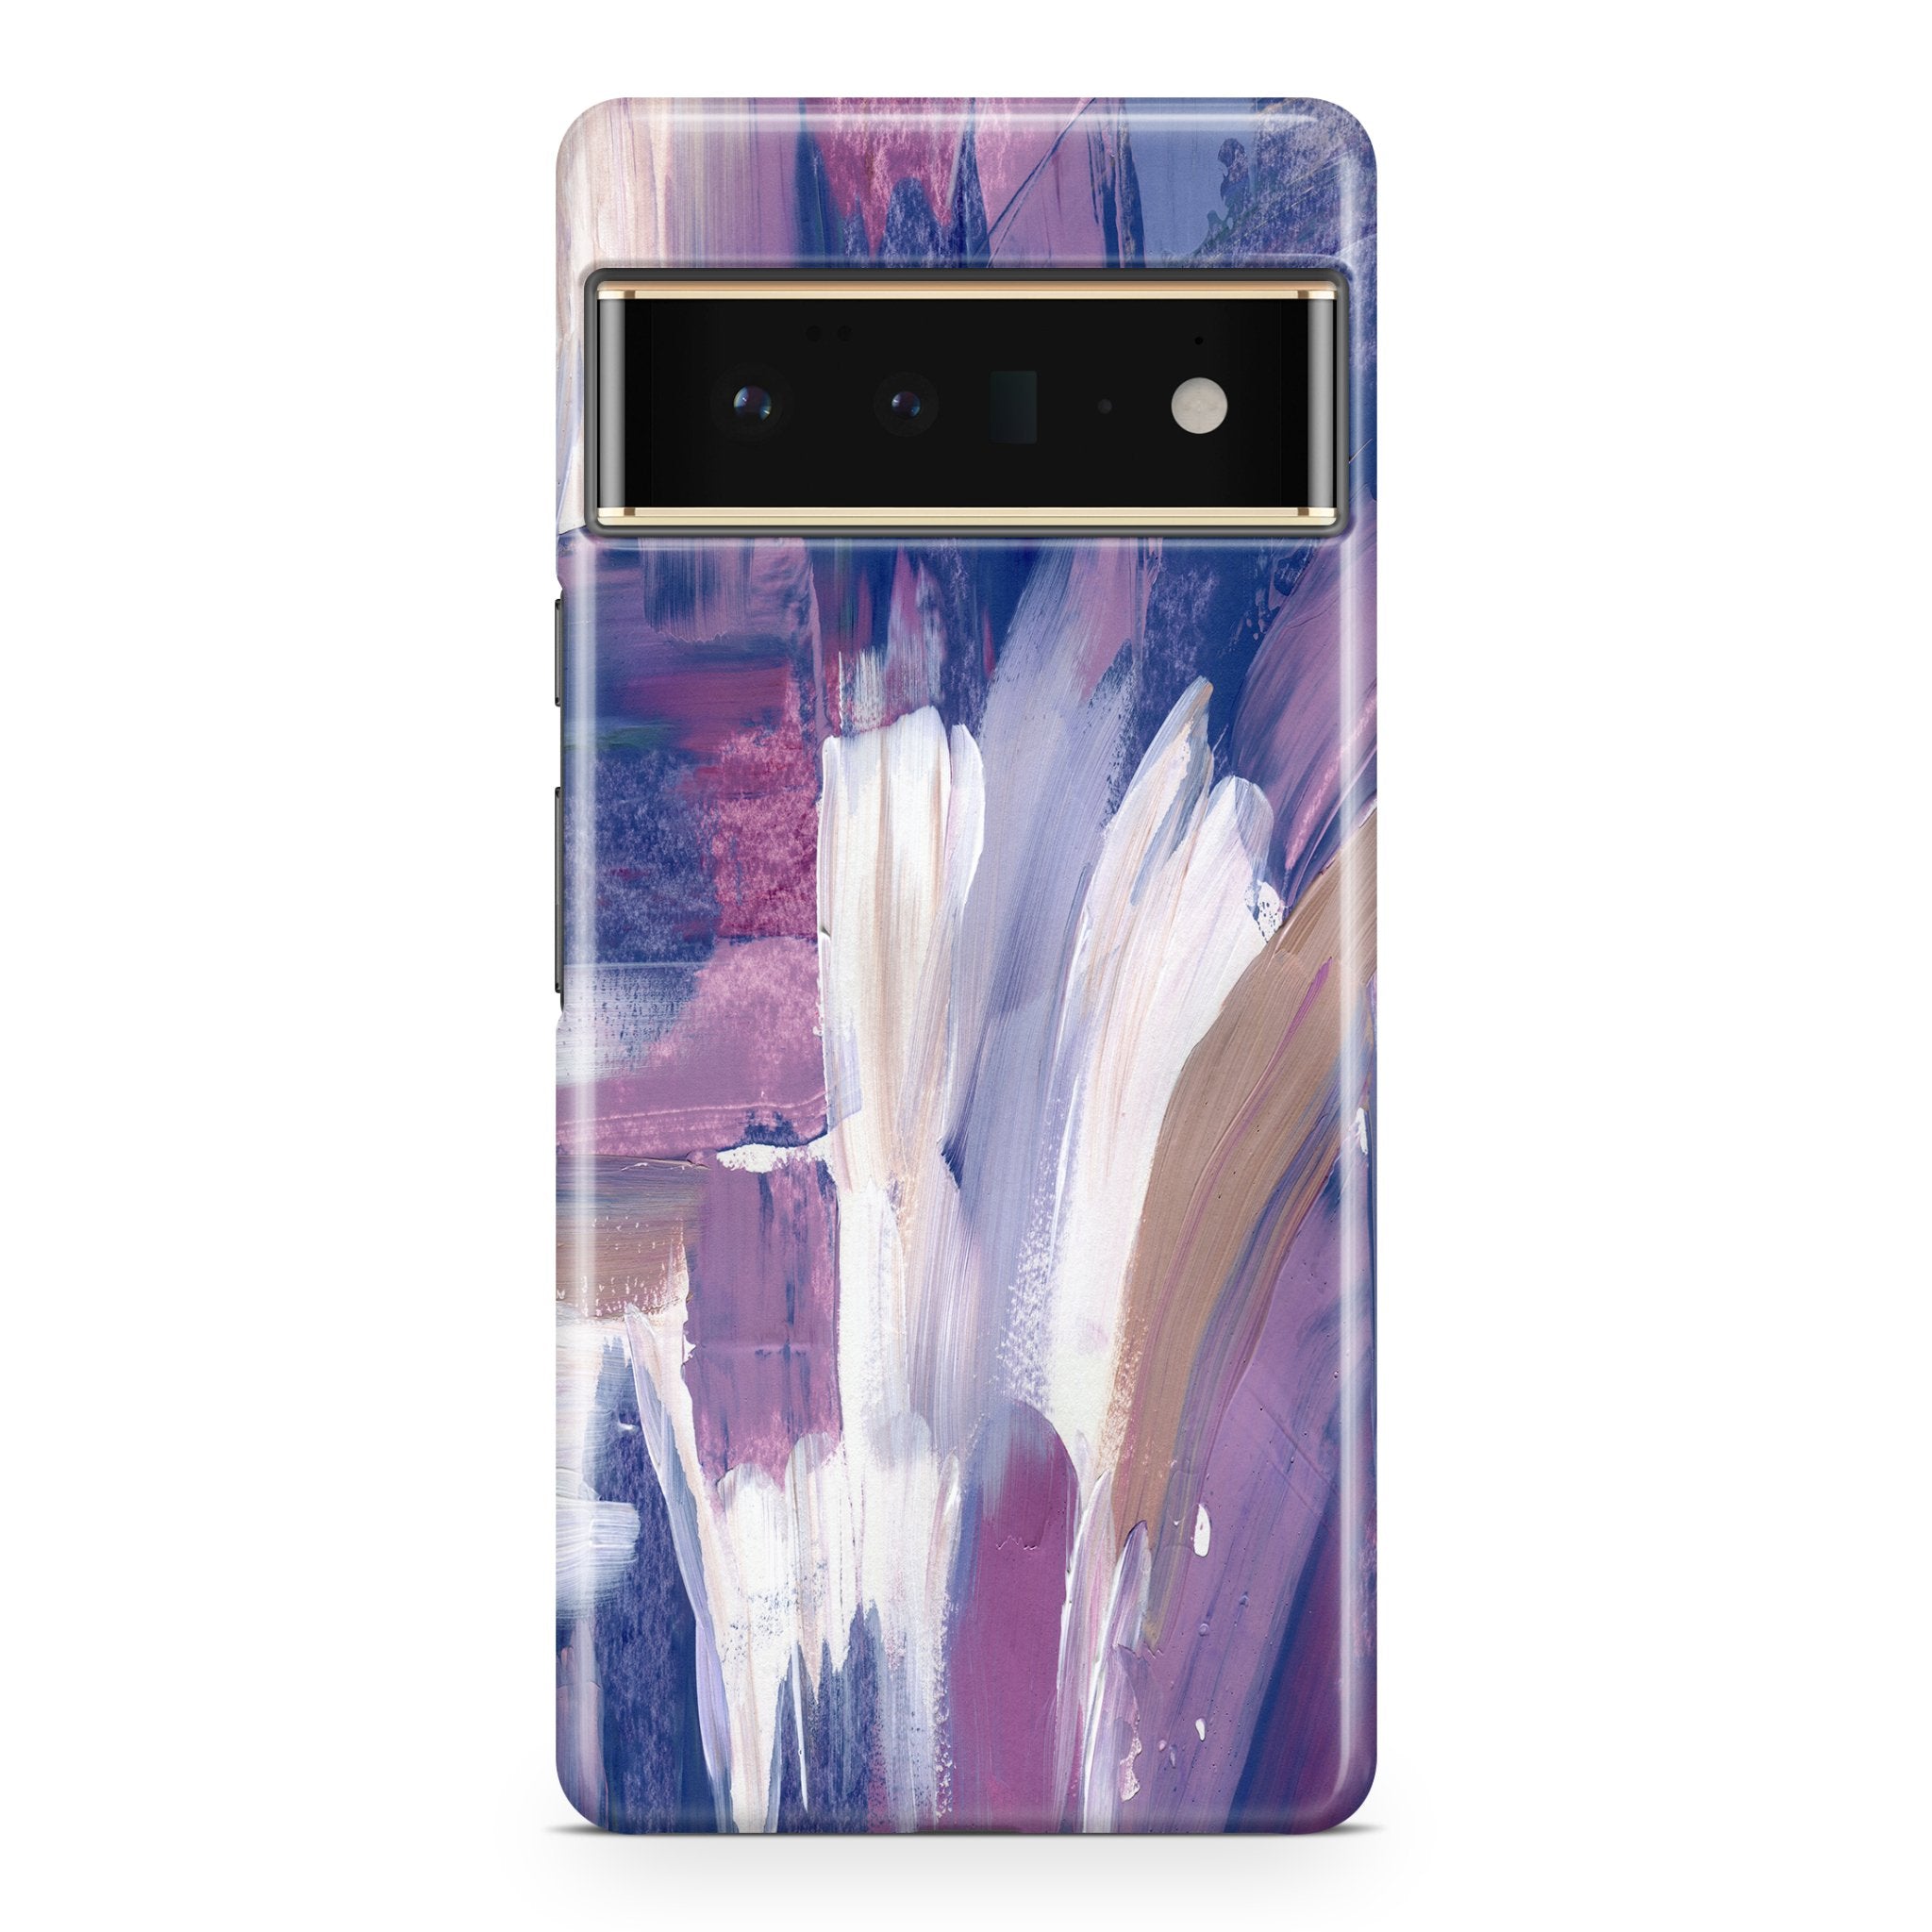 Makeup Blender I - Google phone case designs by CaseSwagger